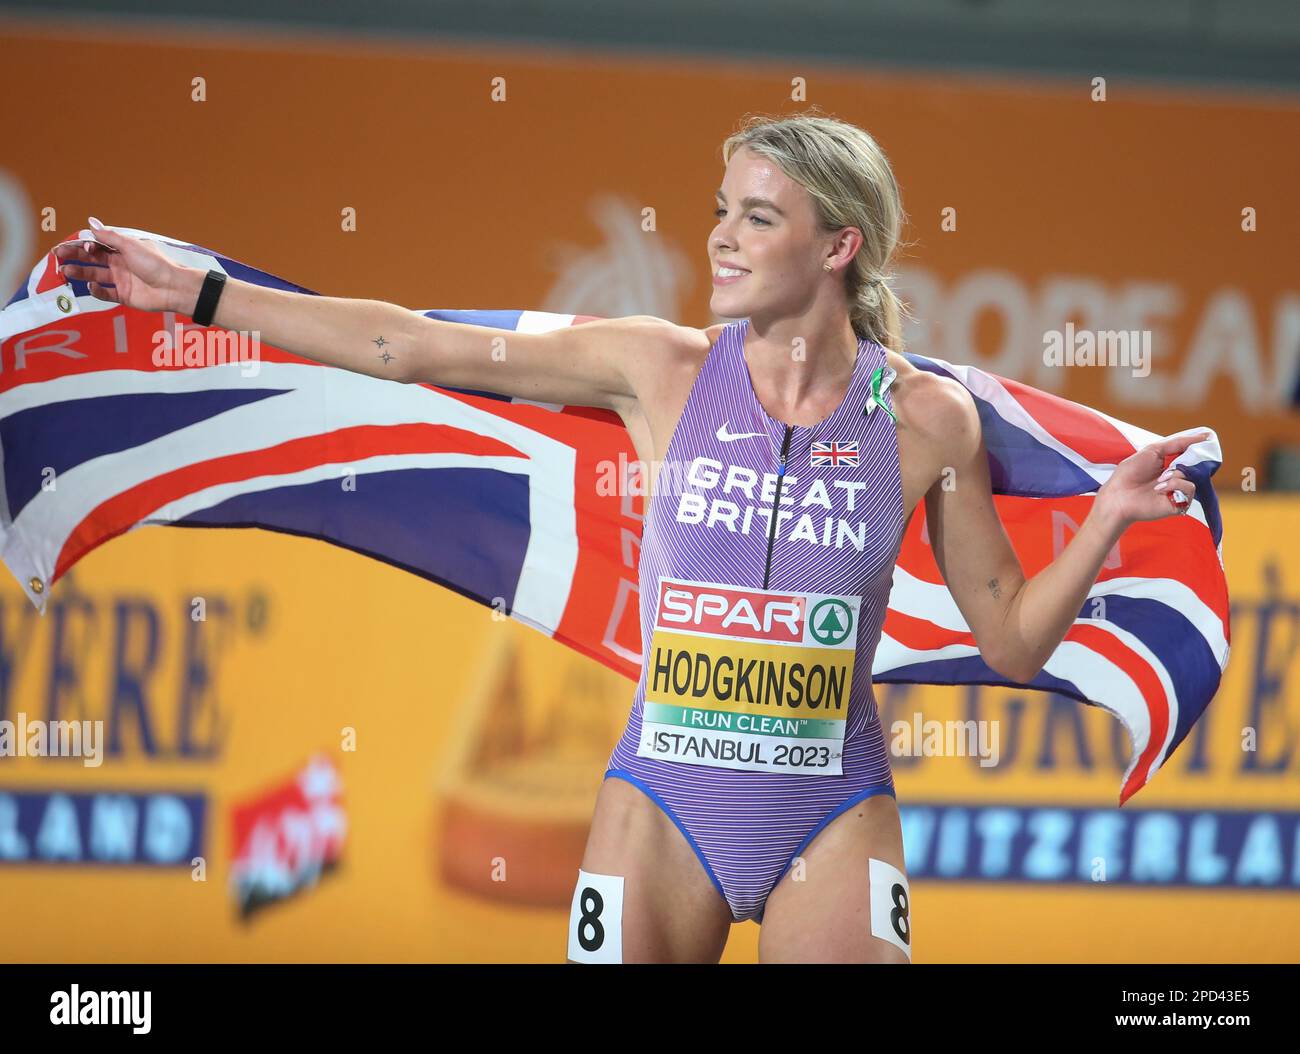 Keely HODGKINSON of Great Britain 800m Women Final during the European